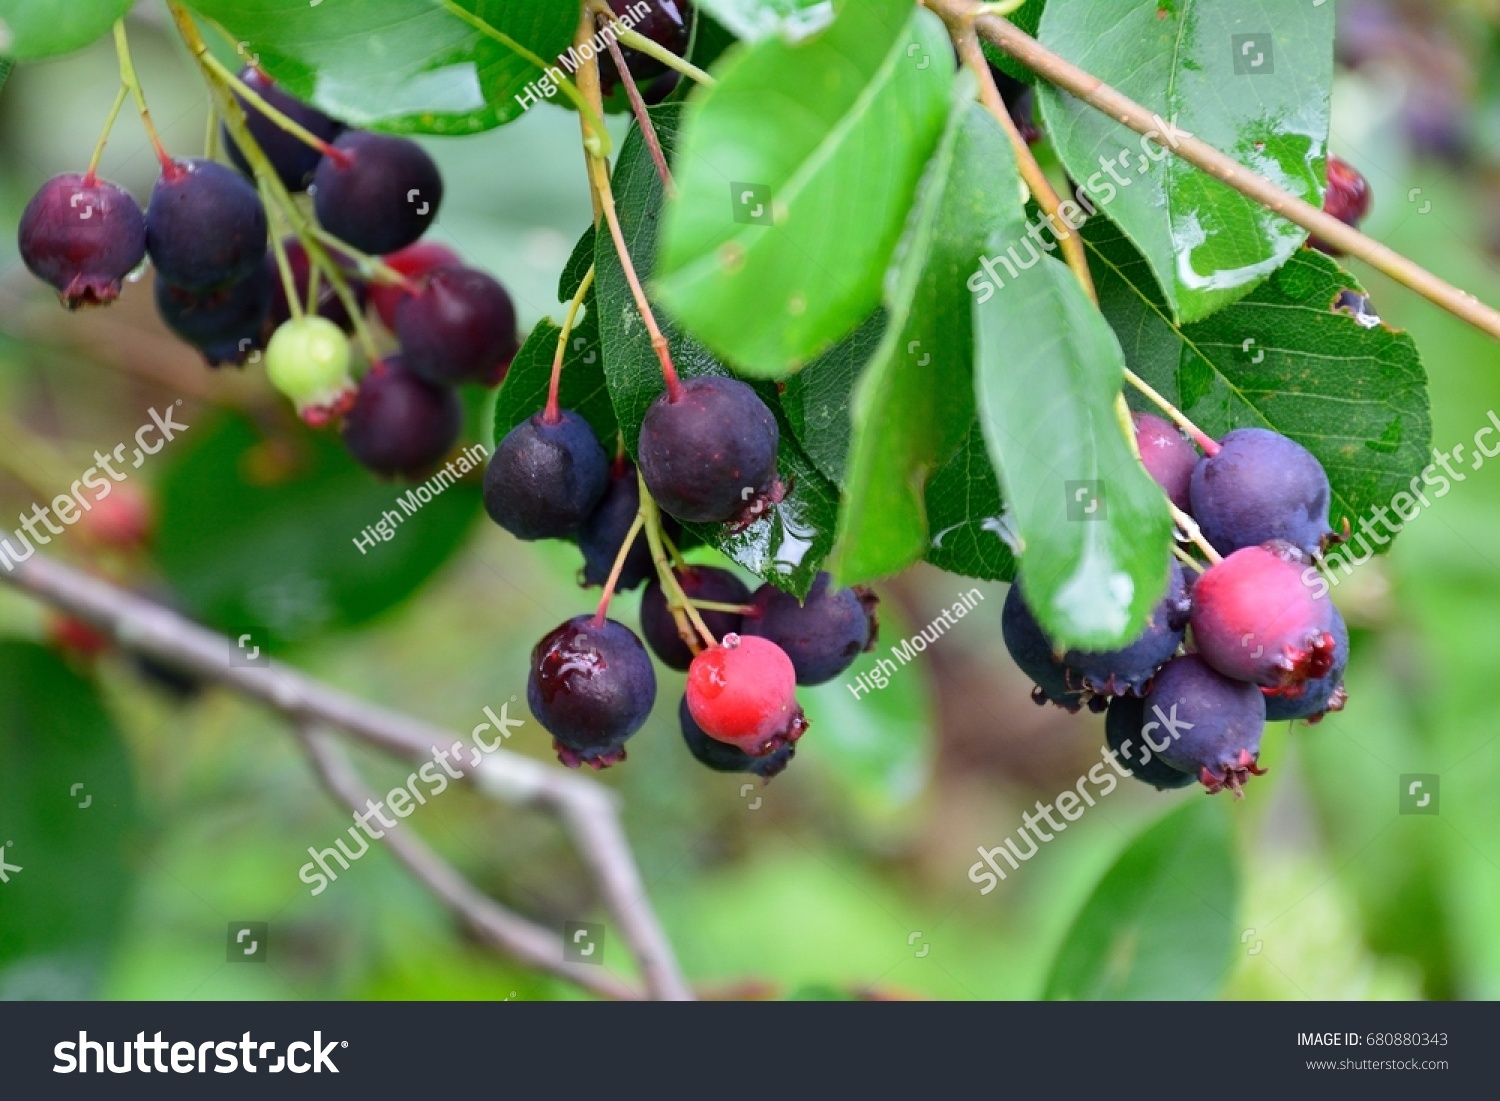 Ripe Fruits June Berry Amelanchier Canadensis Nature Stock Image